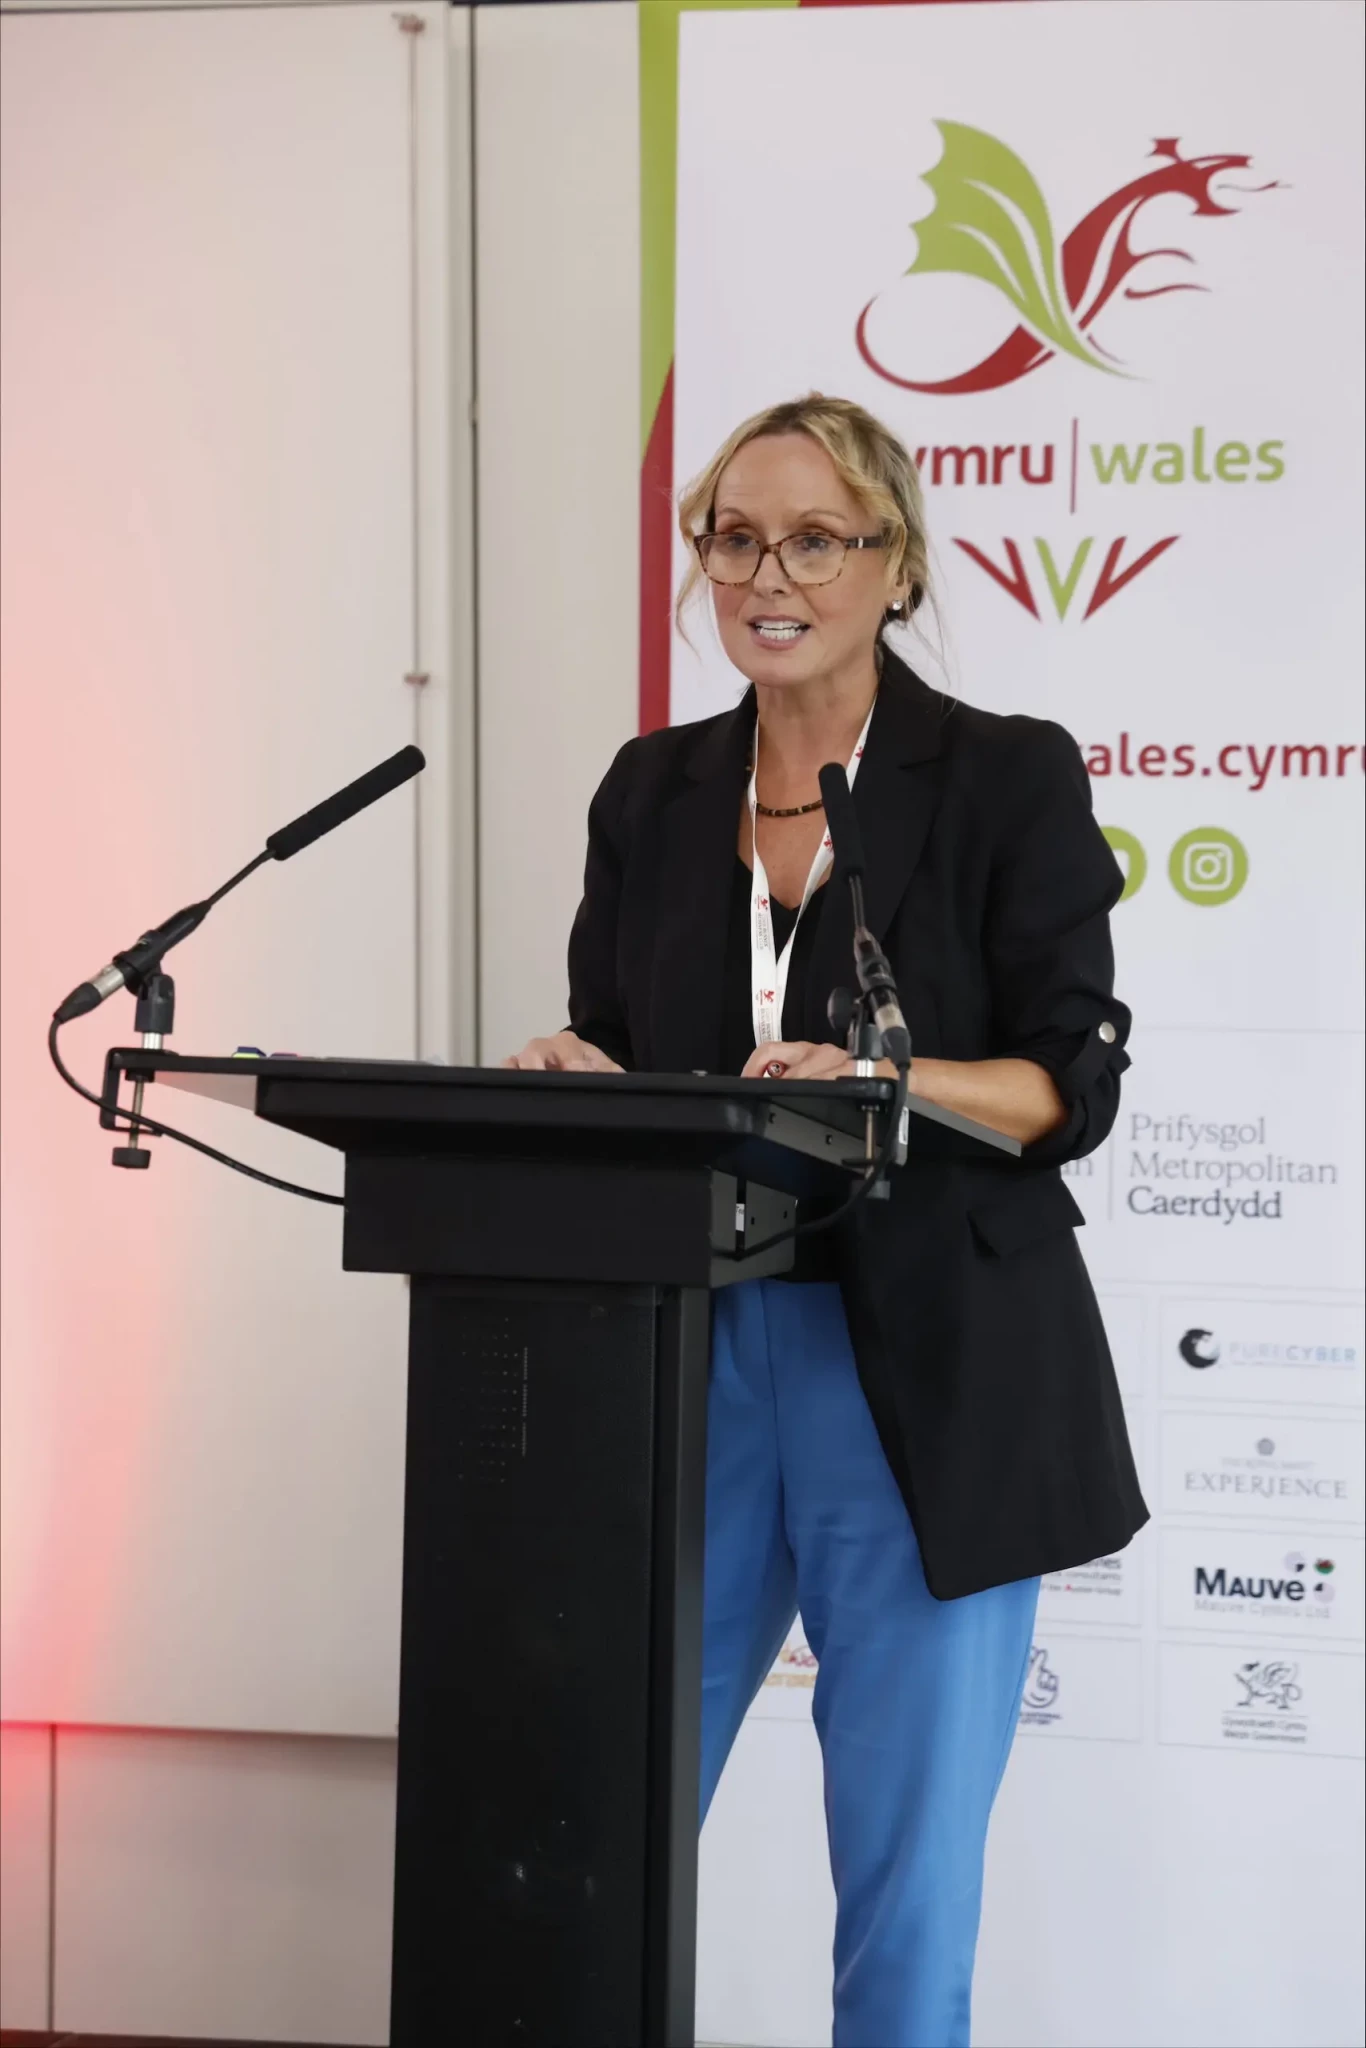 Commonwealth Games Wales plans to expand Tîm Cymru Business Club across country 